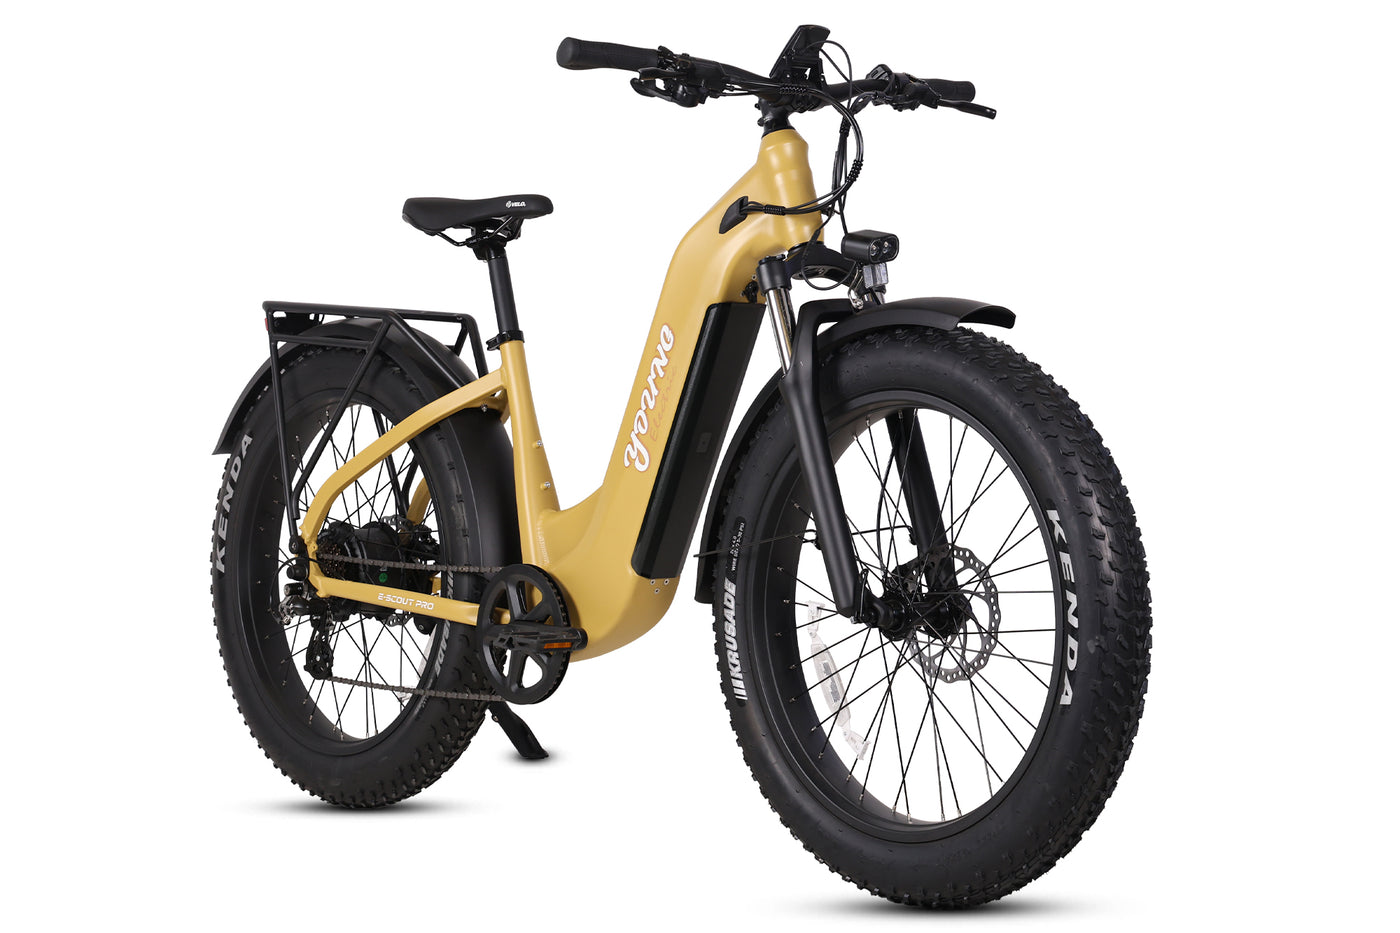 Young Electric Canada | E-Scout Pro Step-Through Commuter Ebike | 960Wh LG Battery, 26’’ All-terrain eBike